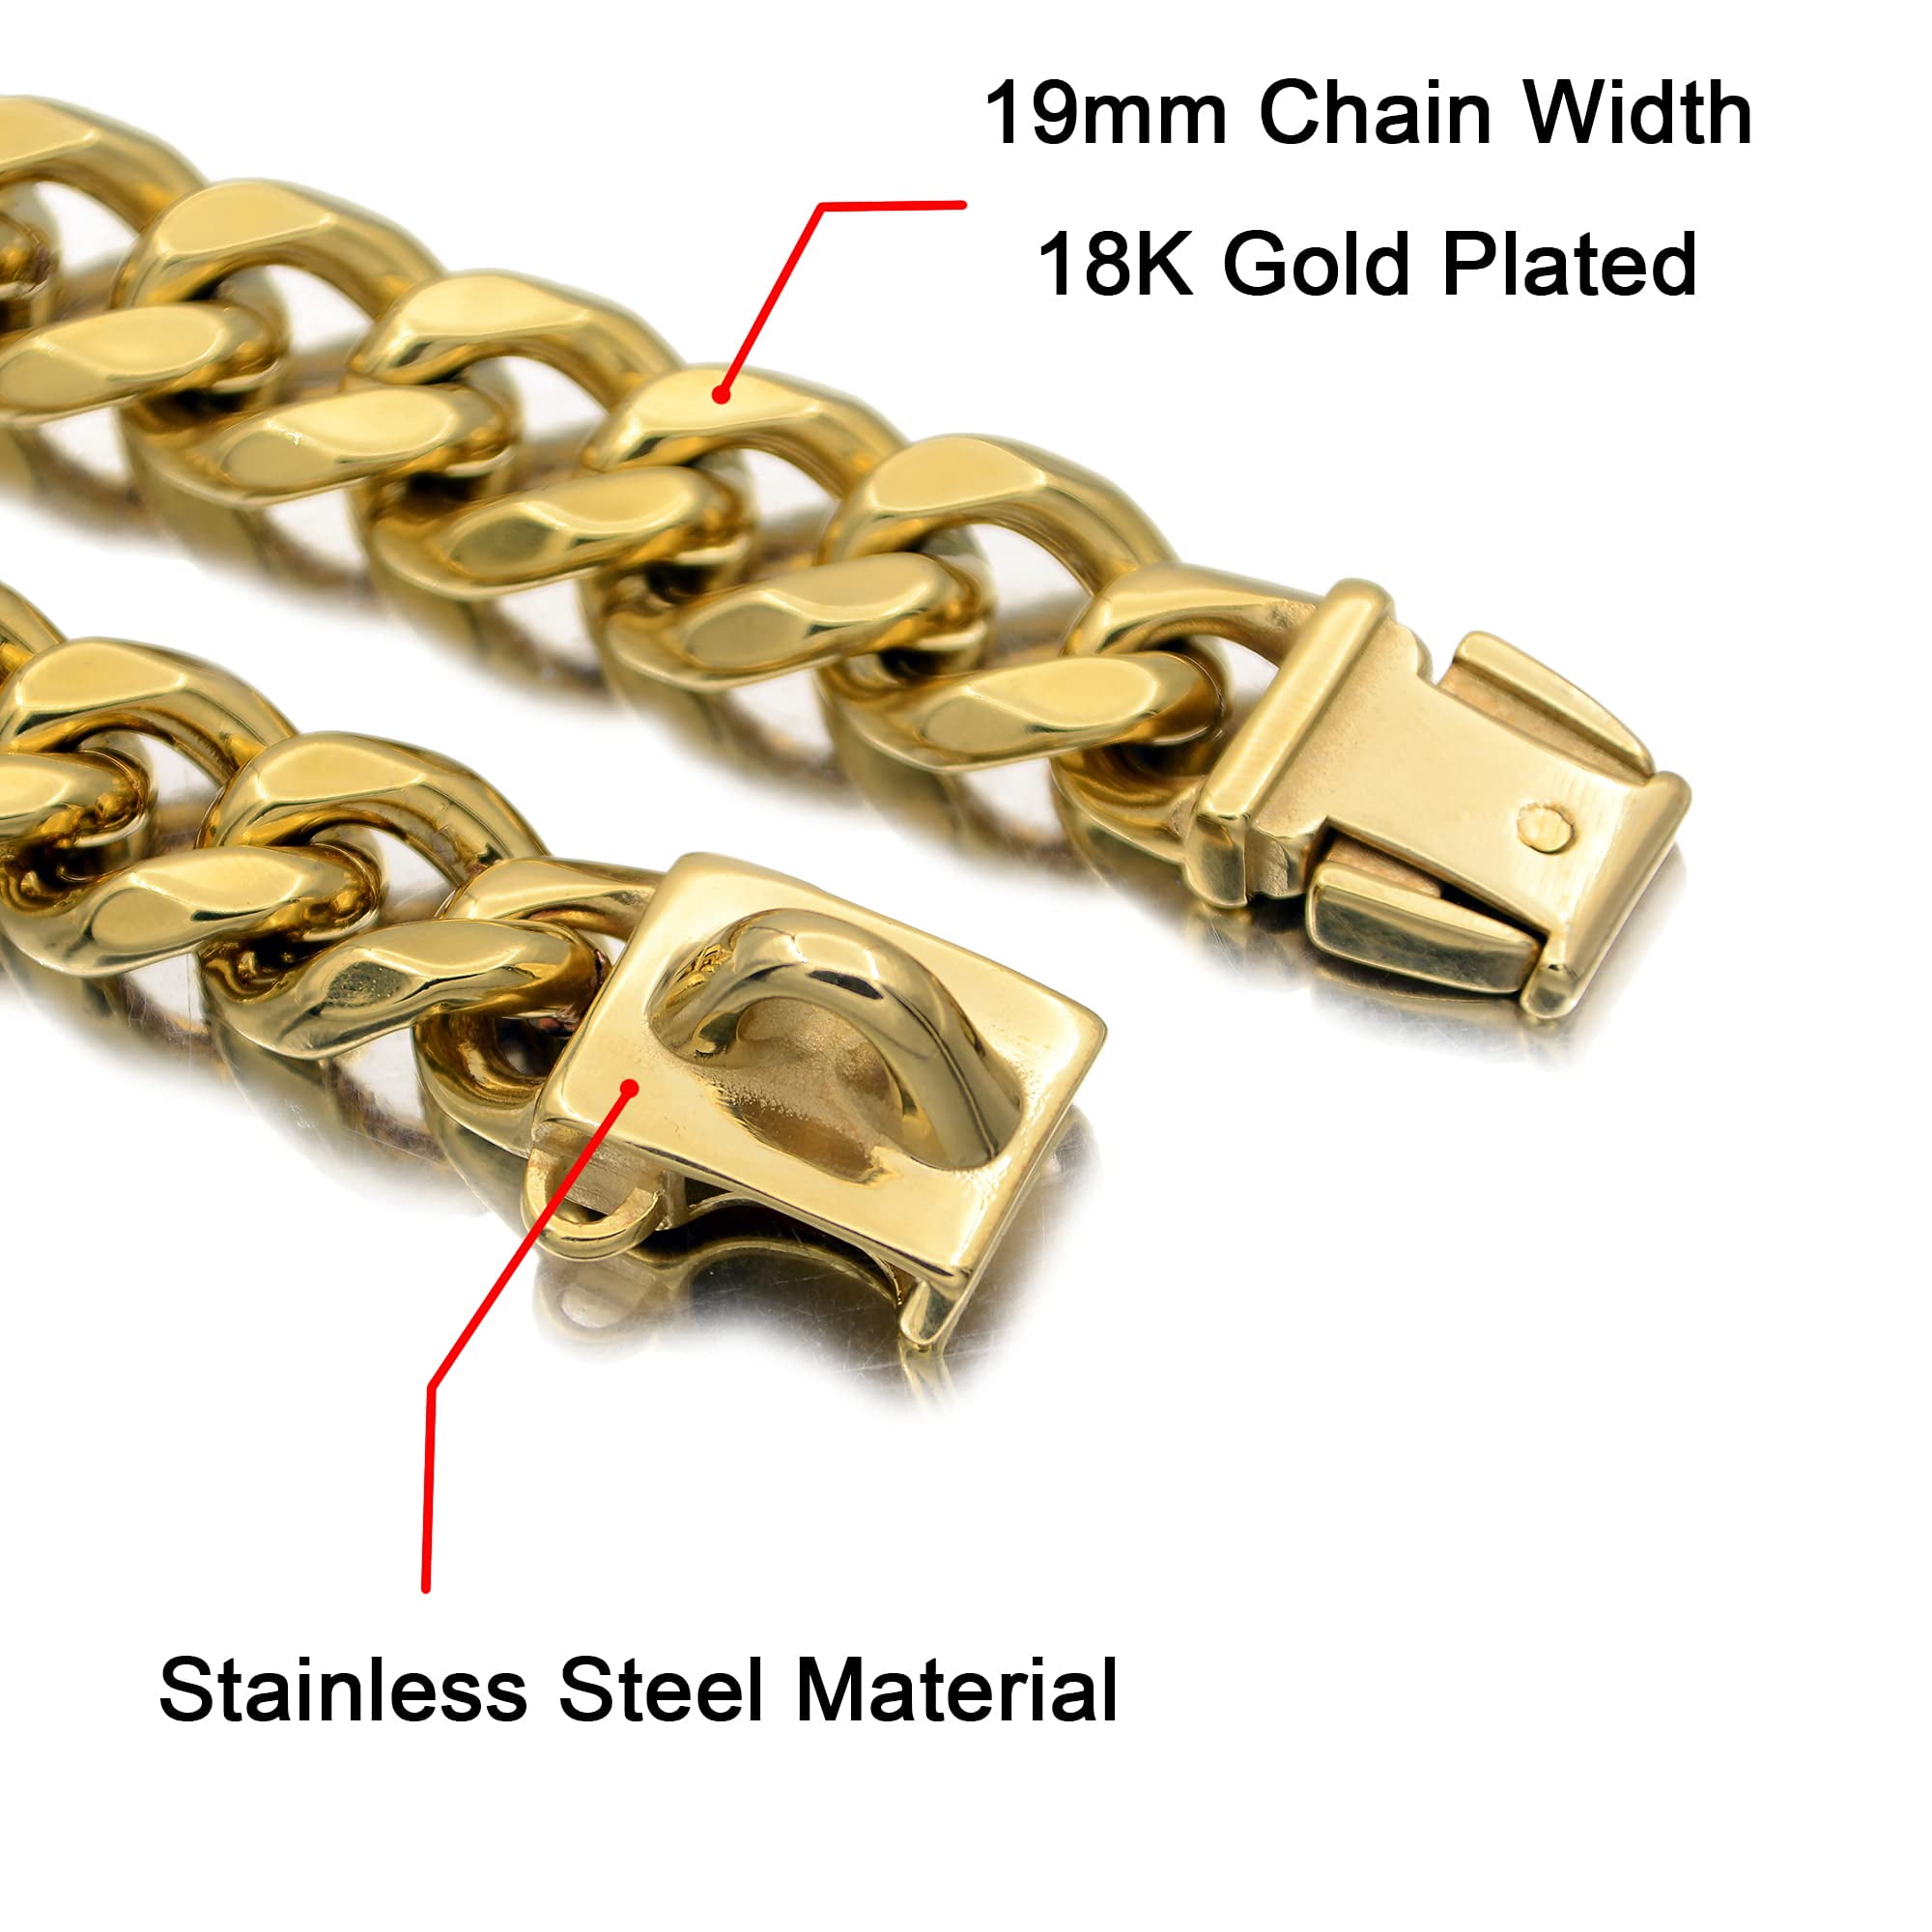  18K Gold Cat Dog Collar Kitten Puppy 1/2inch 12mm Wide  Stainless Steel Kitten Choker Curb Chew Proof Cuban Link Chain with Bell  (Neck Fit 6-8) : Pet Supplies